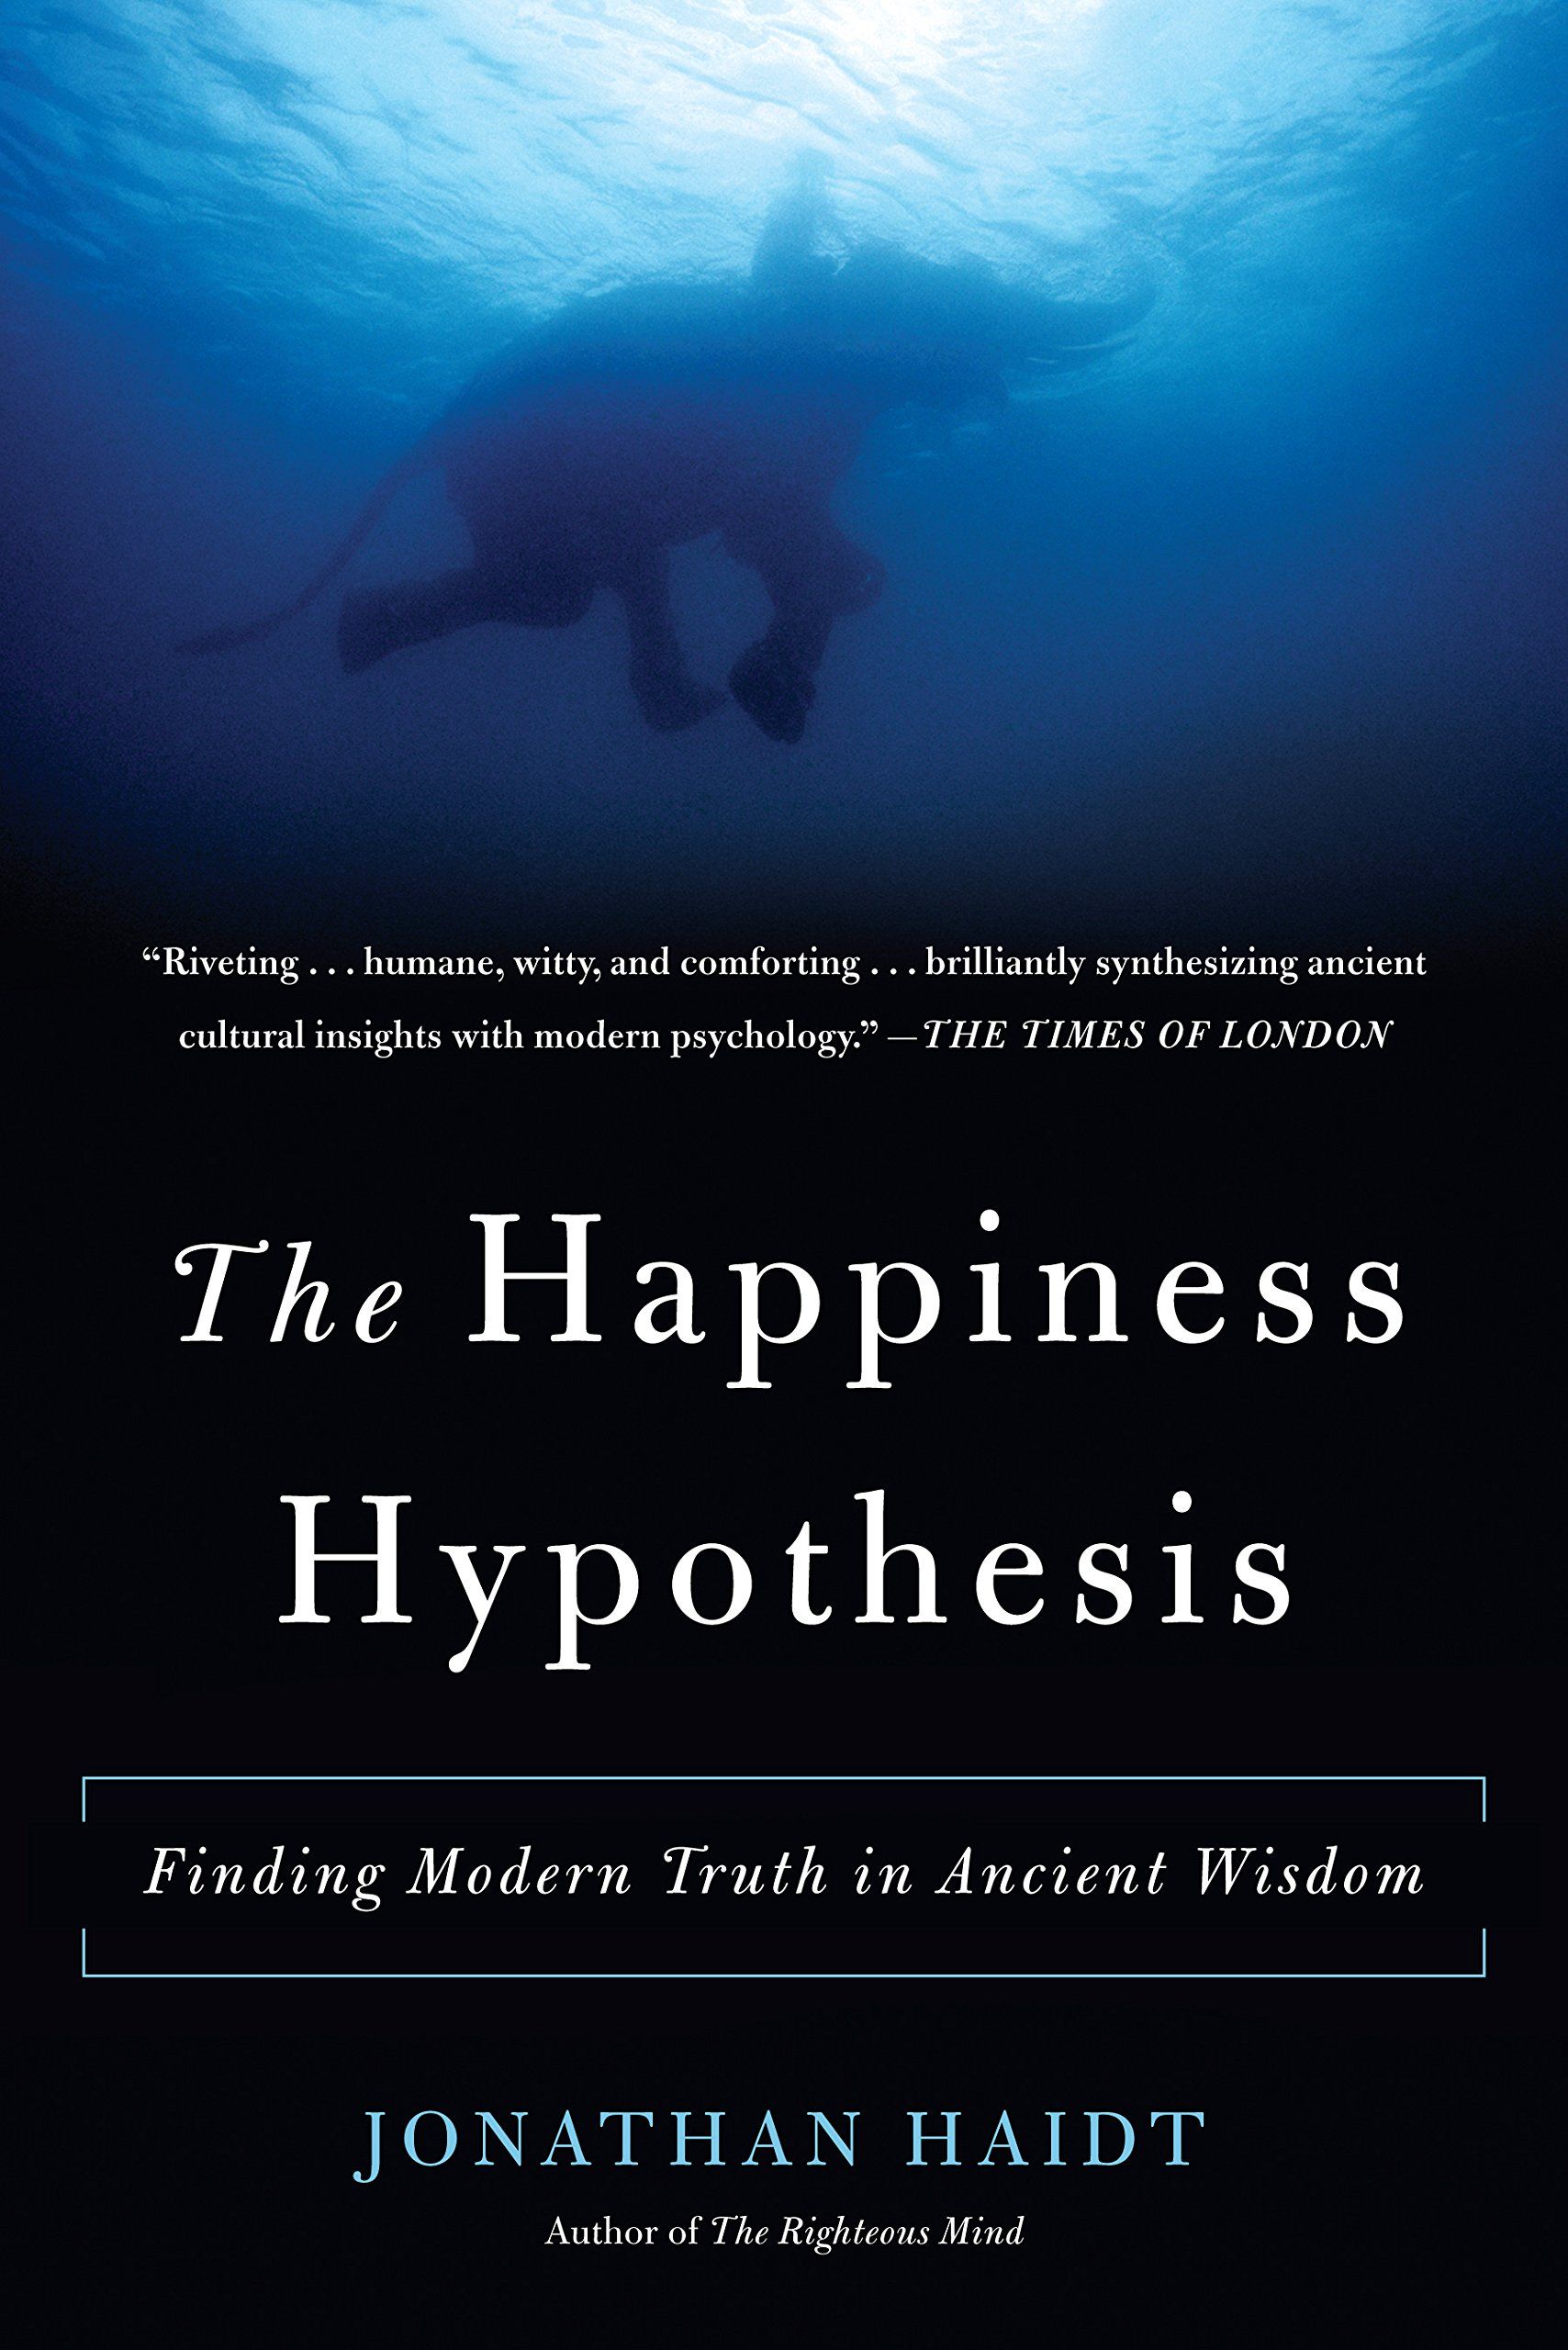  The Happiness Hypothesis: Finding Modern Truth in Ancient Wisdom